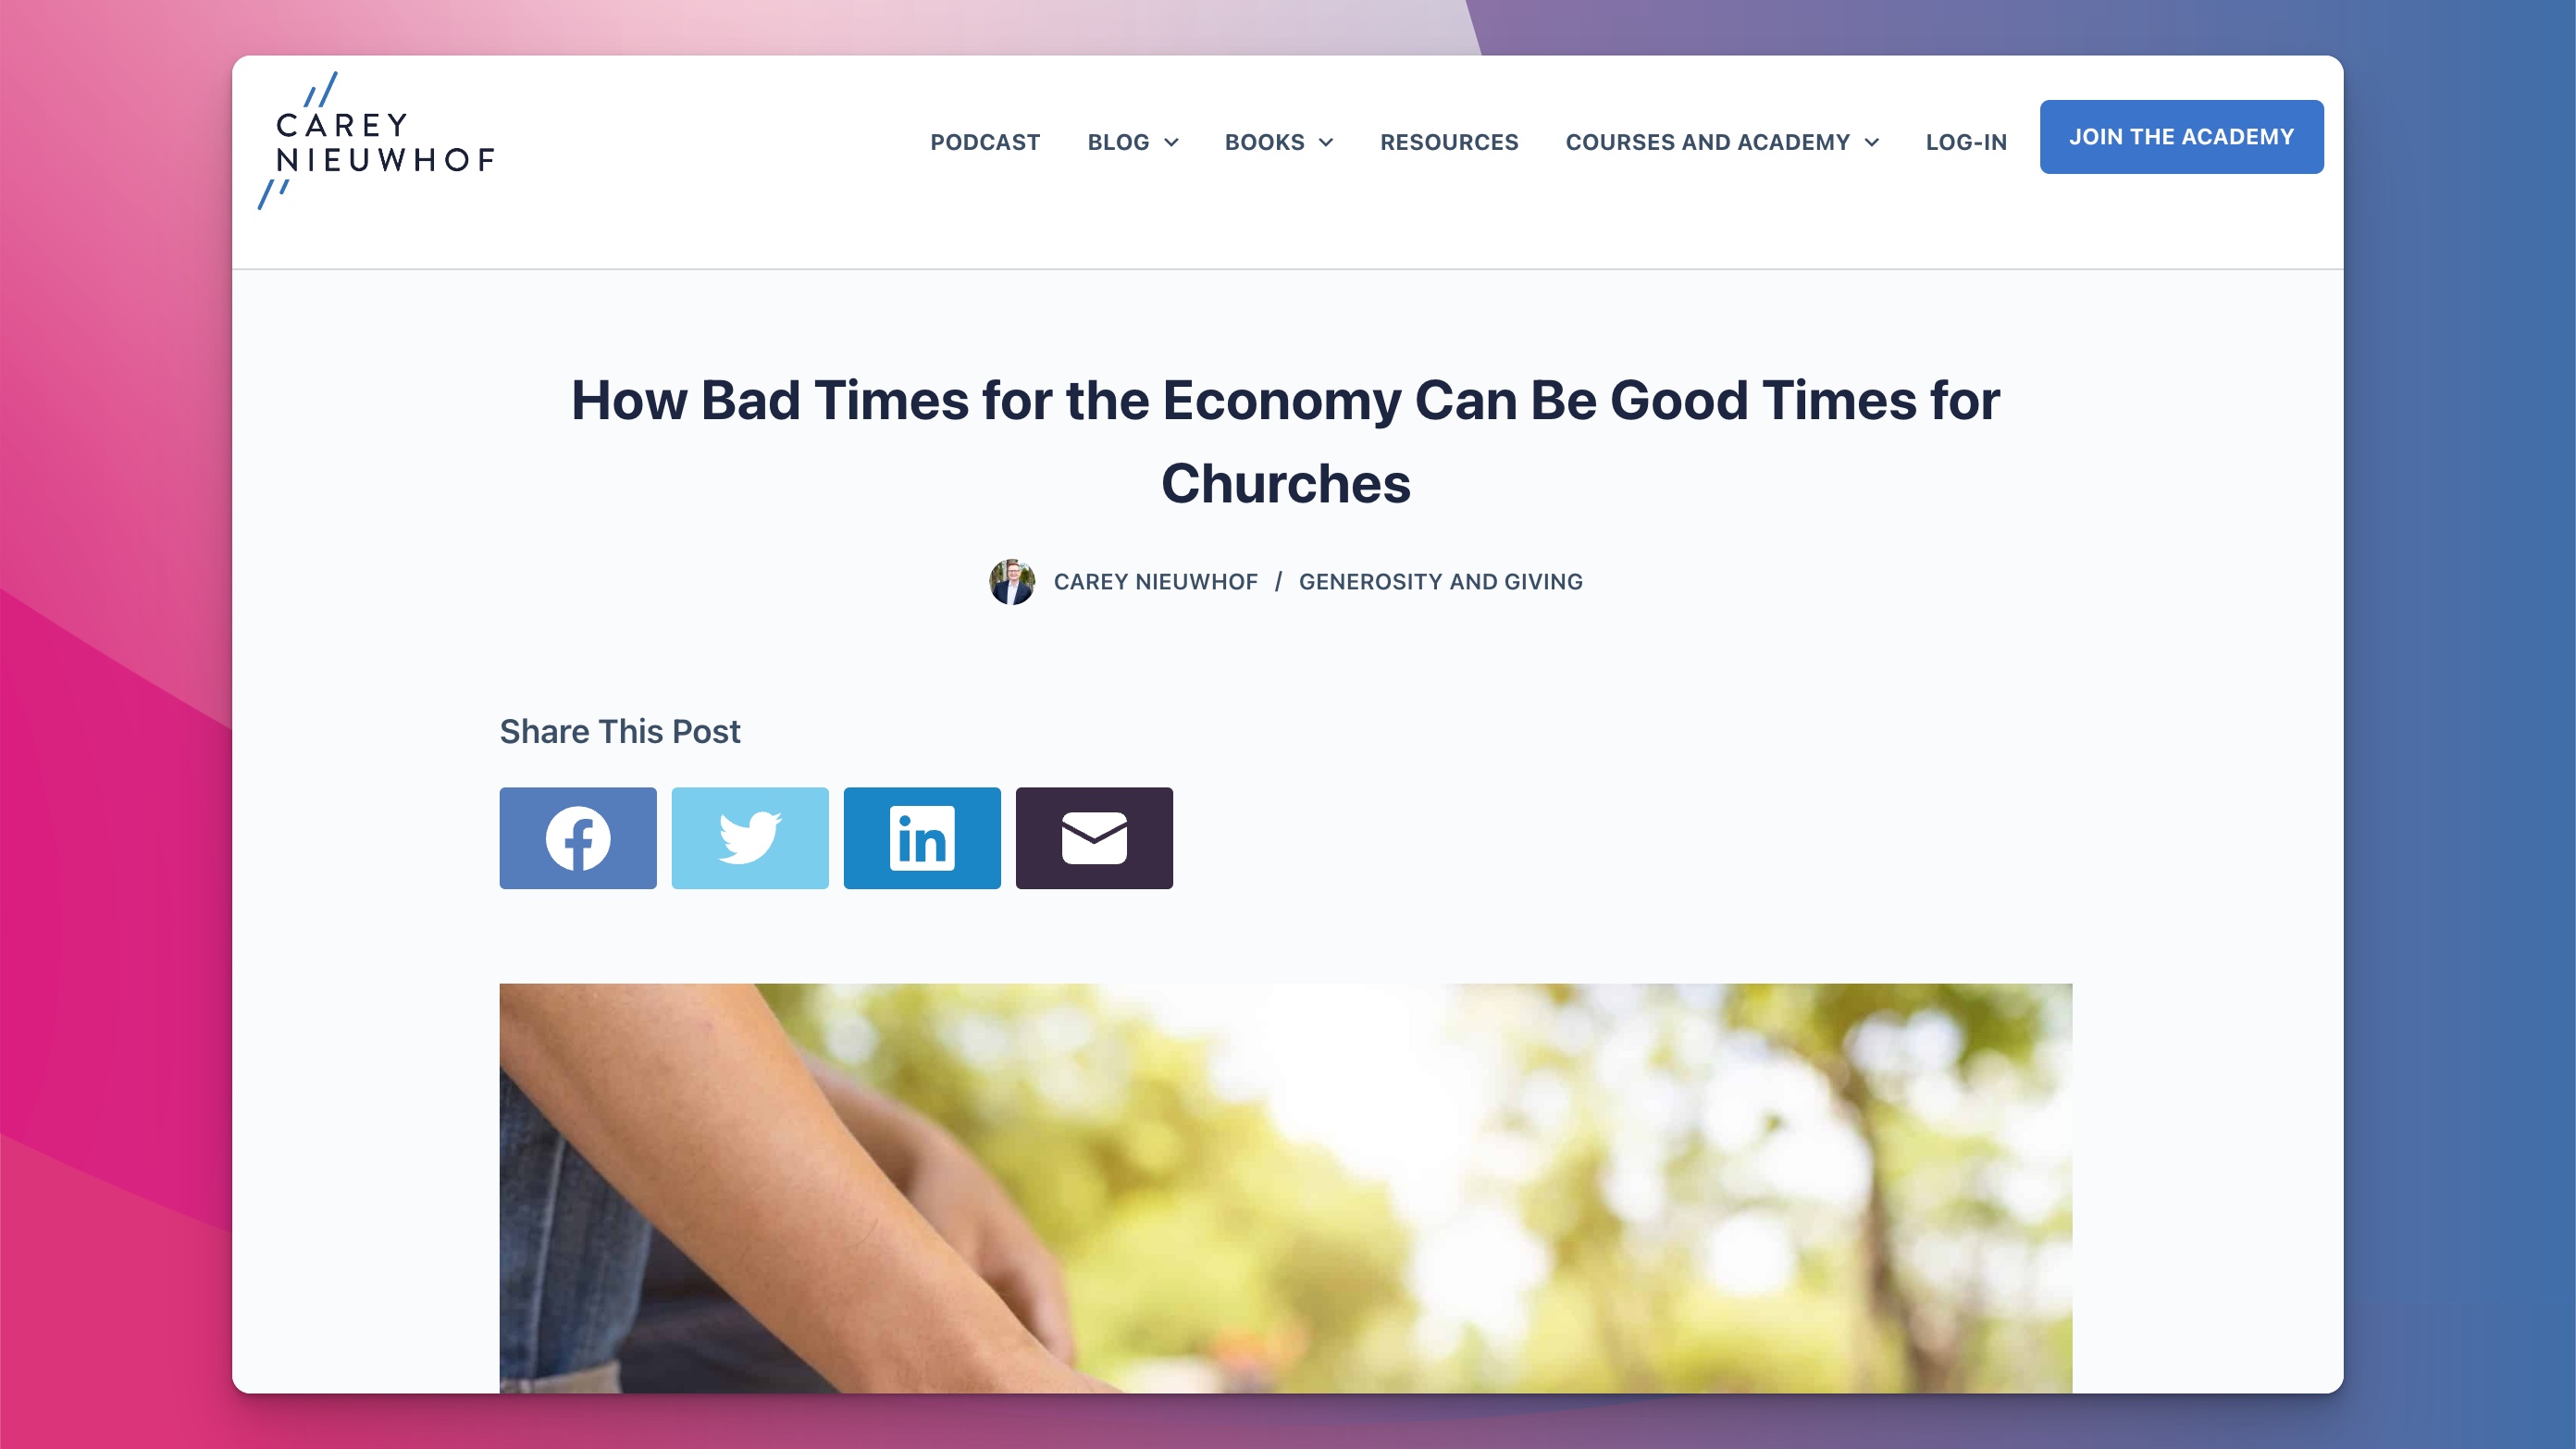 Bad times for the economy can be good times for churches